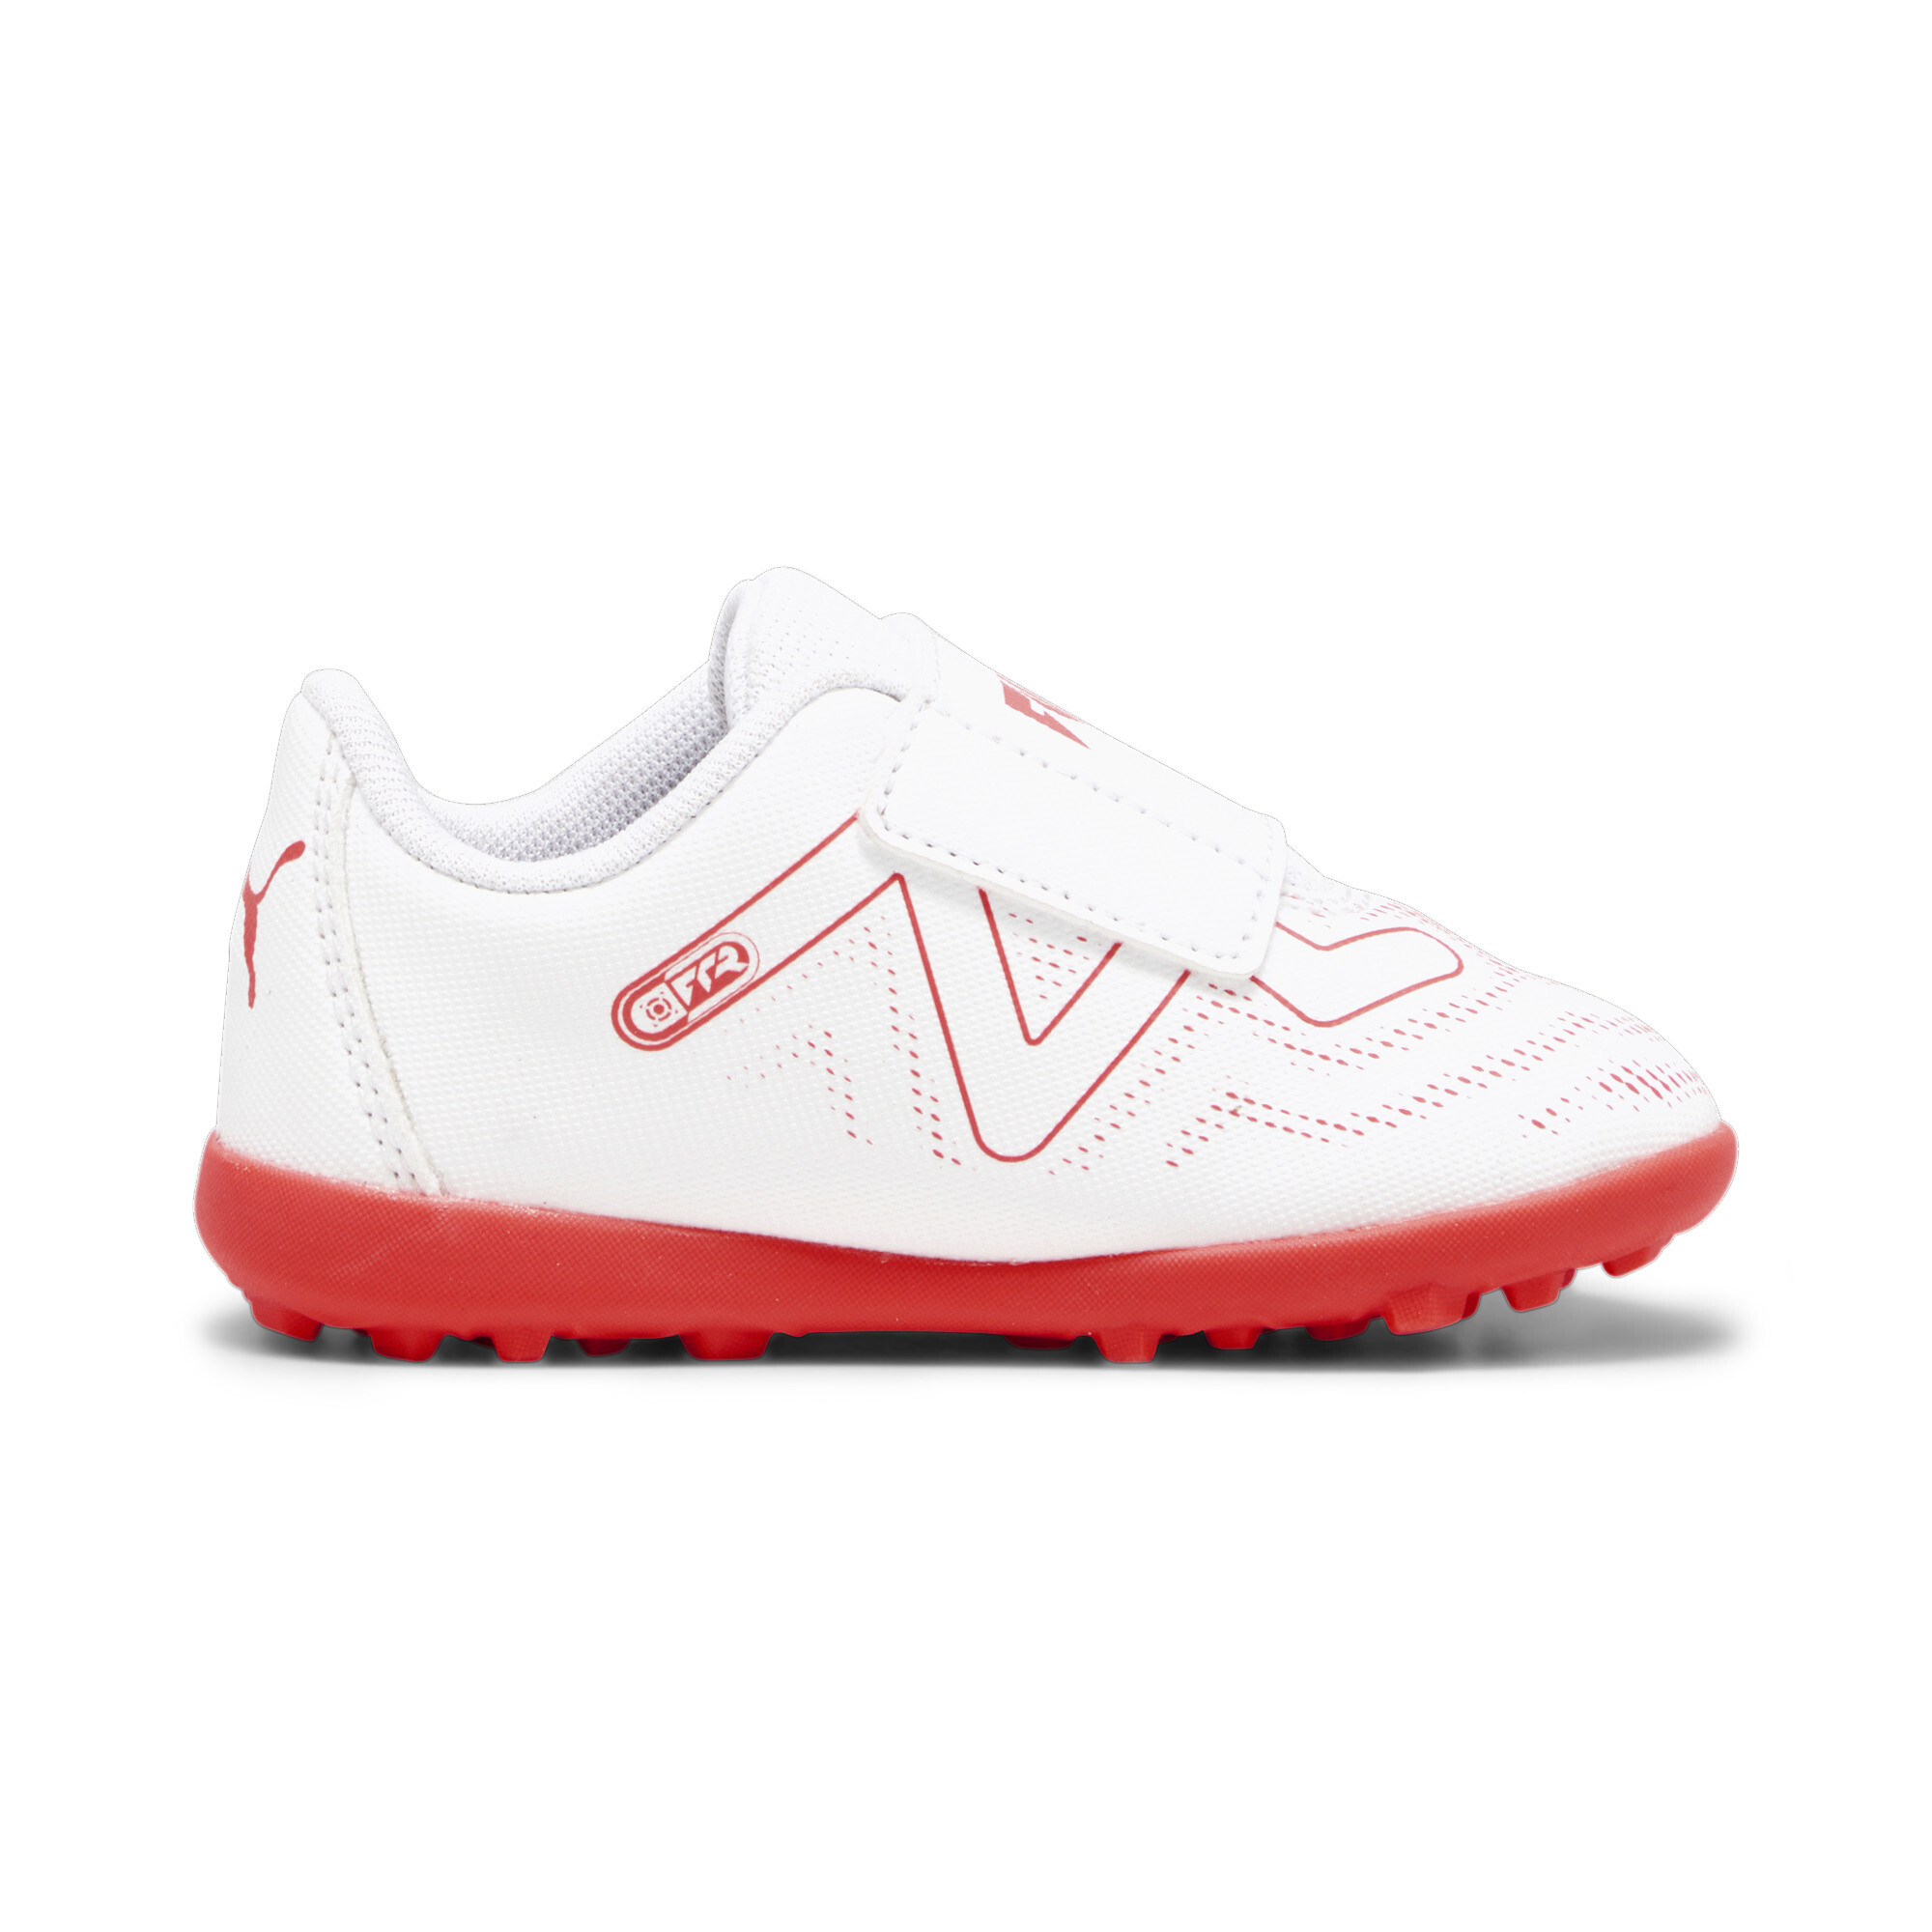 Kids' PUMA FUTURE PLAY TT Toddlers' Football Boots In White, Size EU 27